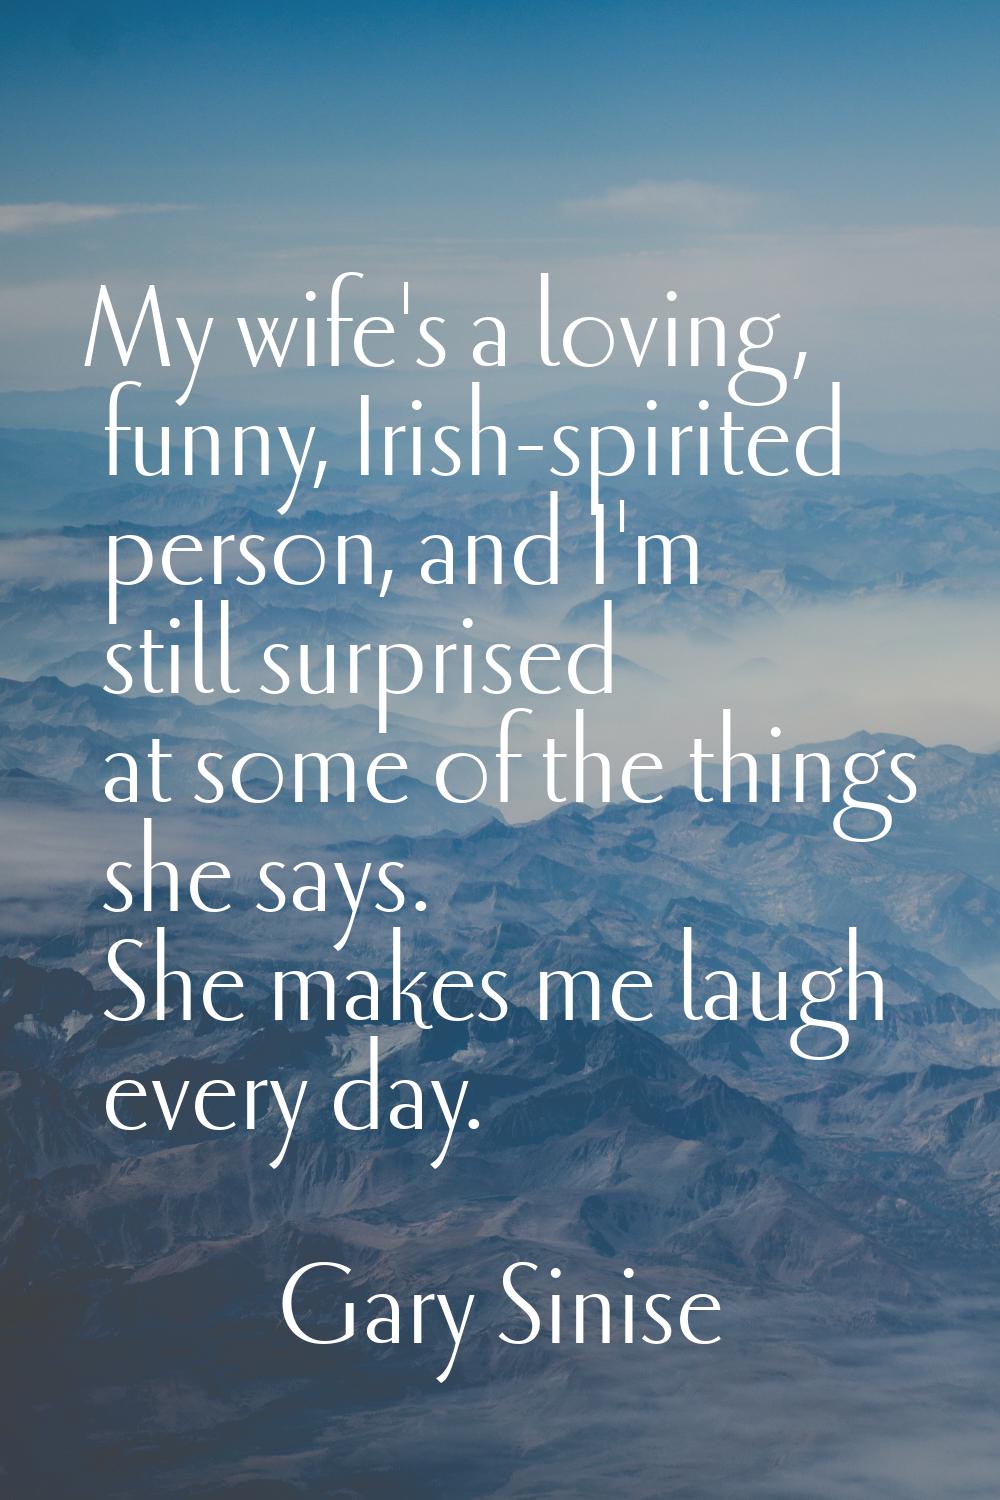 My wife's a loving, funny, Irish-spirited person, and I'm still surprised at some of the things she